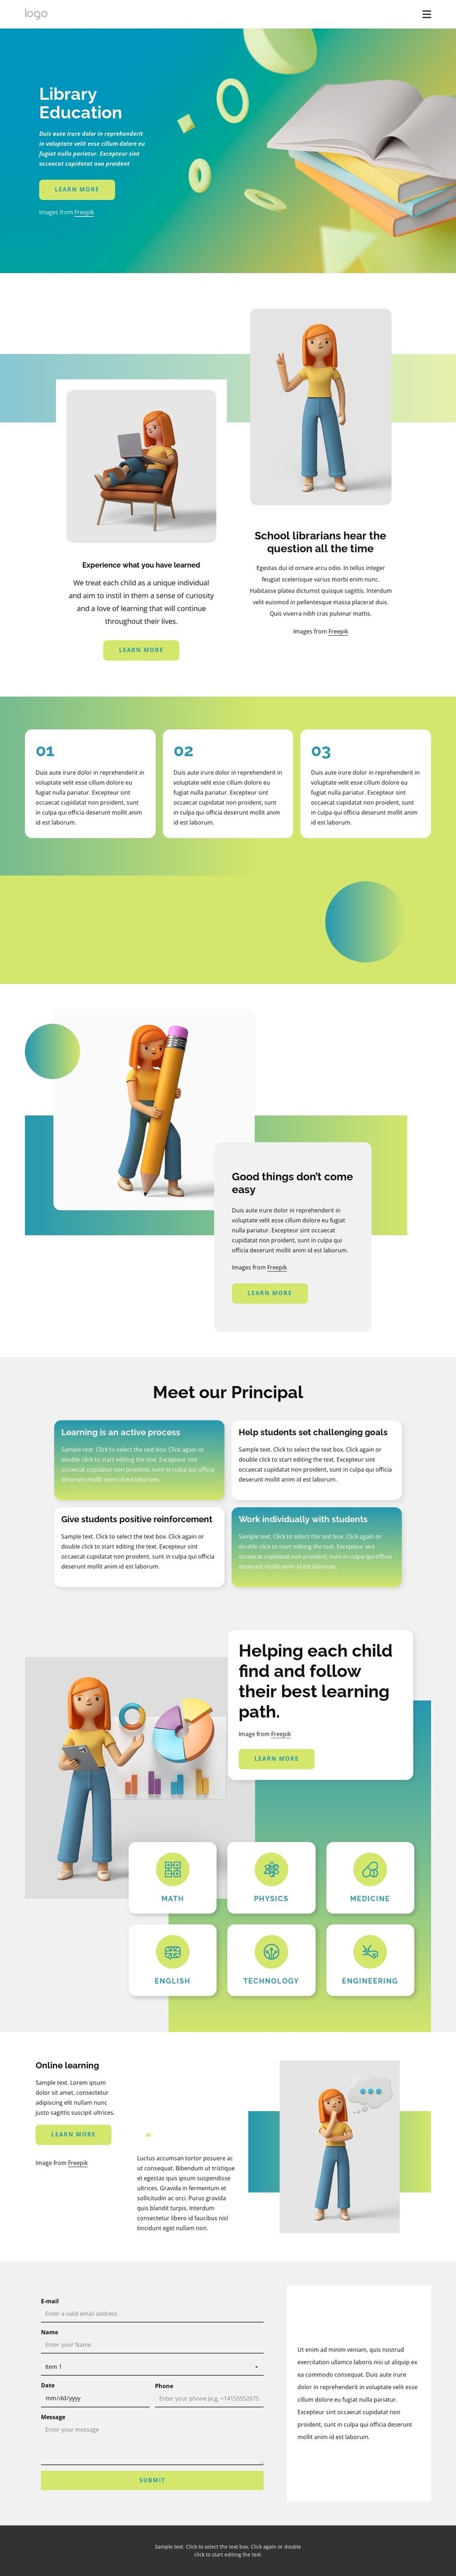 Education library Wix Template Alternative